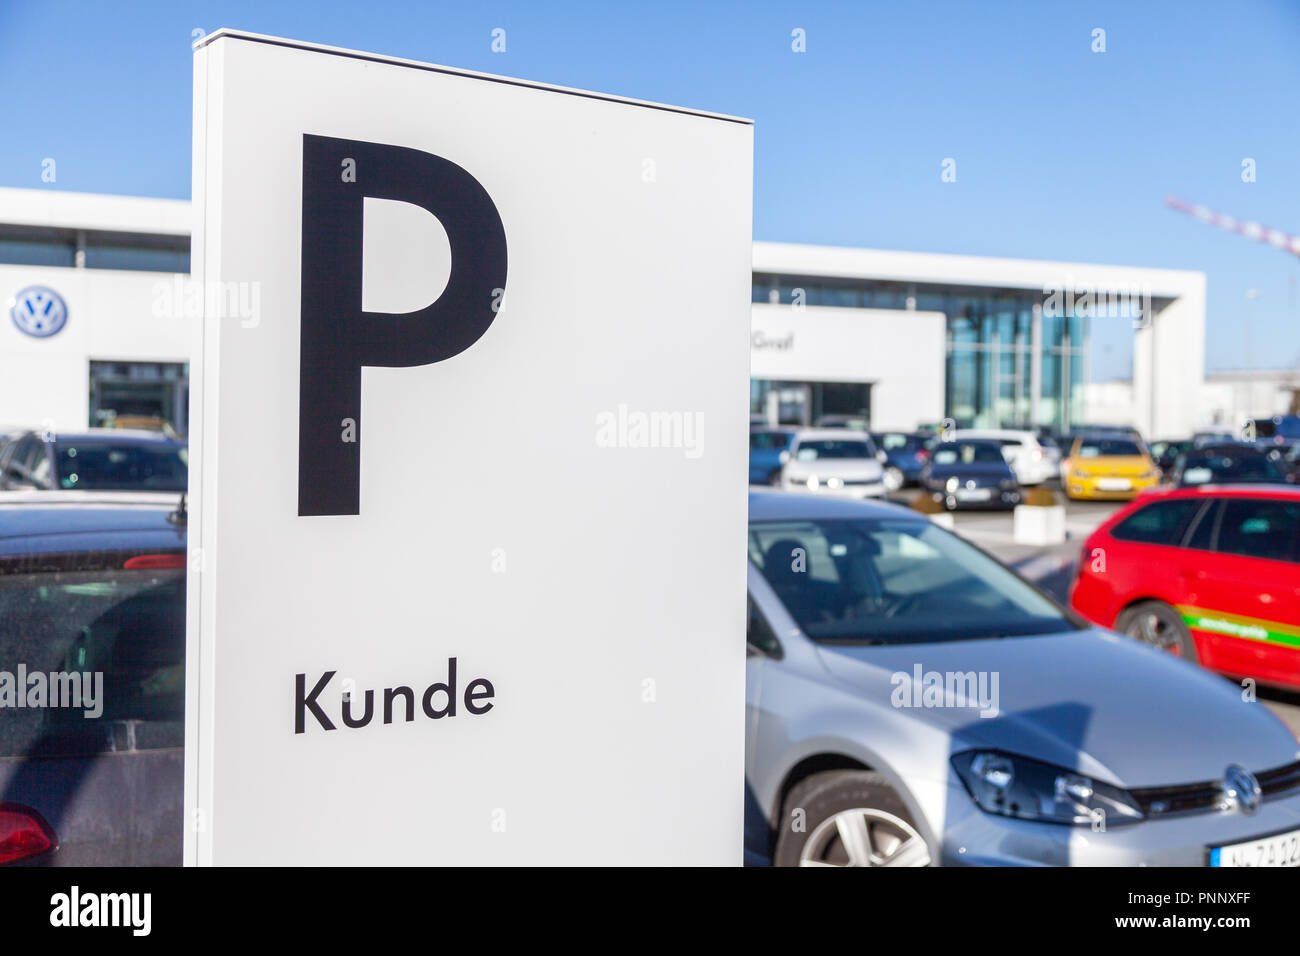 FUERTH / GERMANY - FEBRUARY 25, 2018: Parking area sign near a Volkswagen car dealer. Kunde means customer. Volkswagen is a German automaker founded o Stock Photo